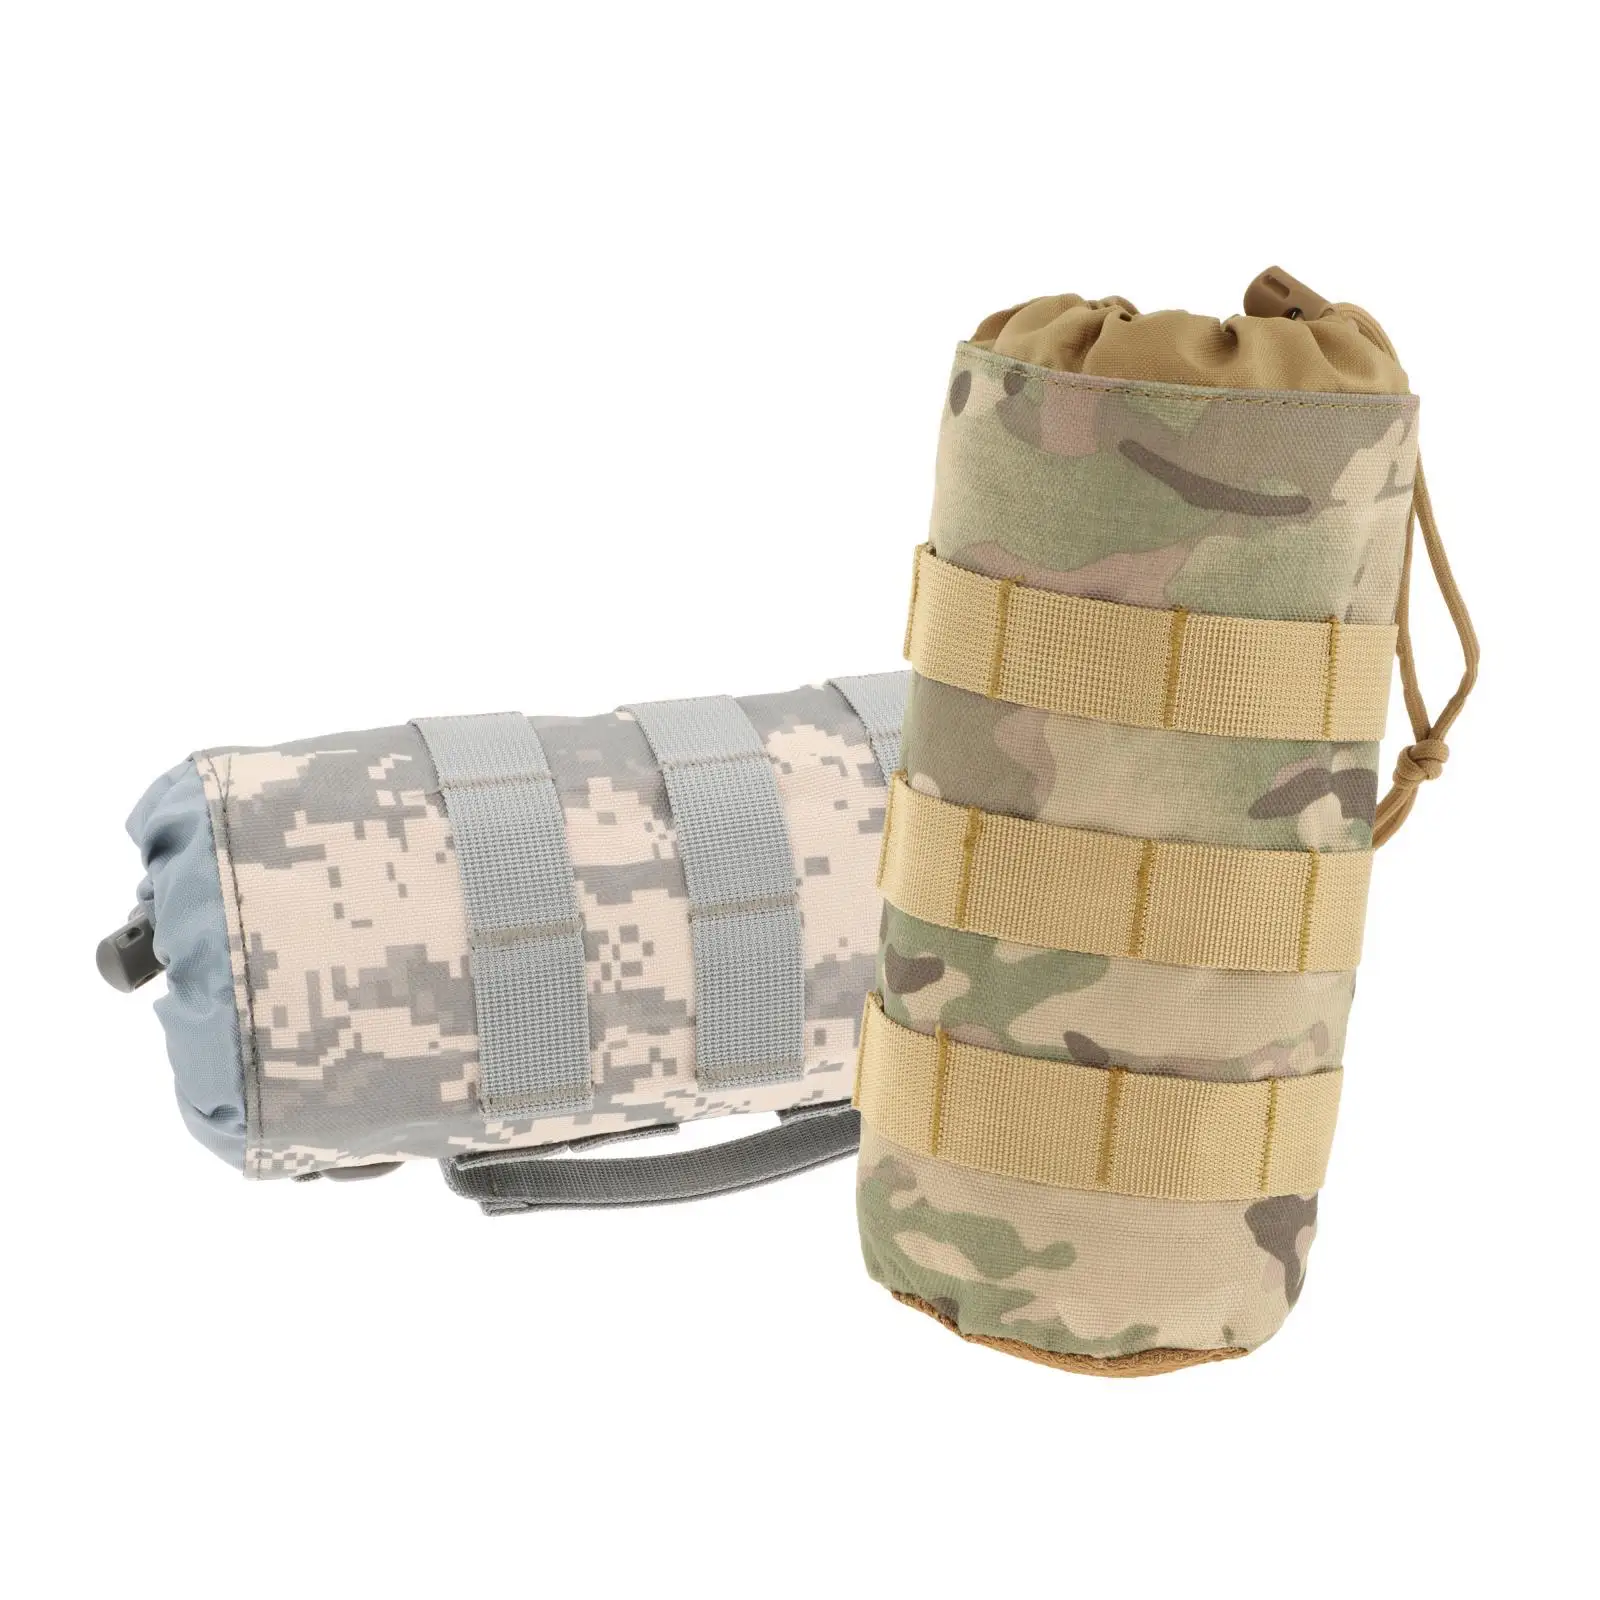 Molle Water Bottle Pouch Bag Military Outdoor Travel Hiking Drawstring Water Bottle Holder Kettle Carrier Bag for Adults